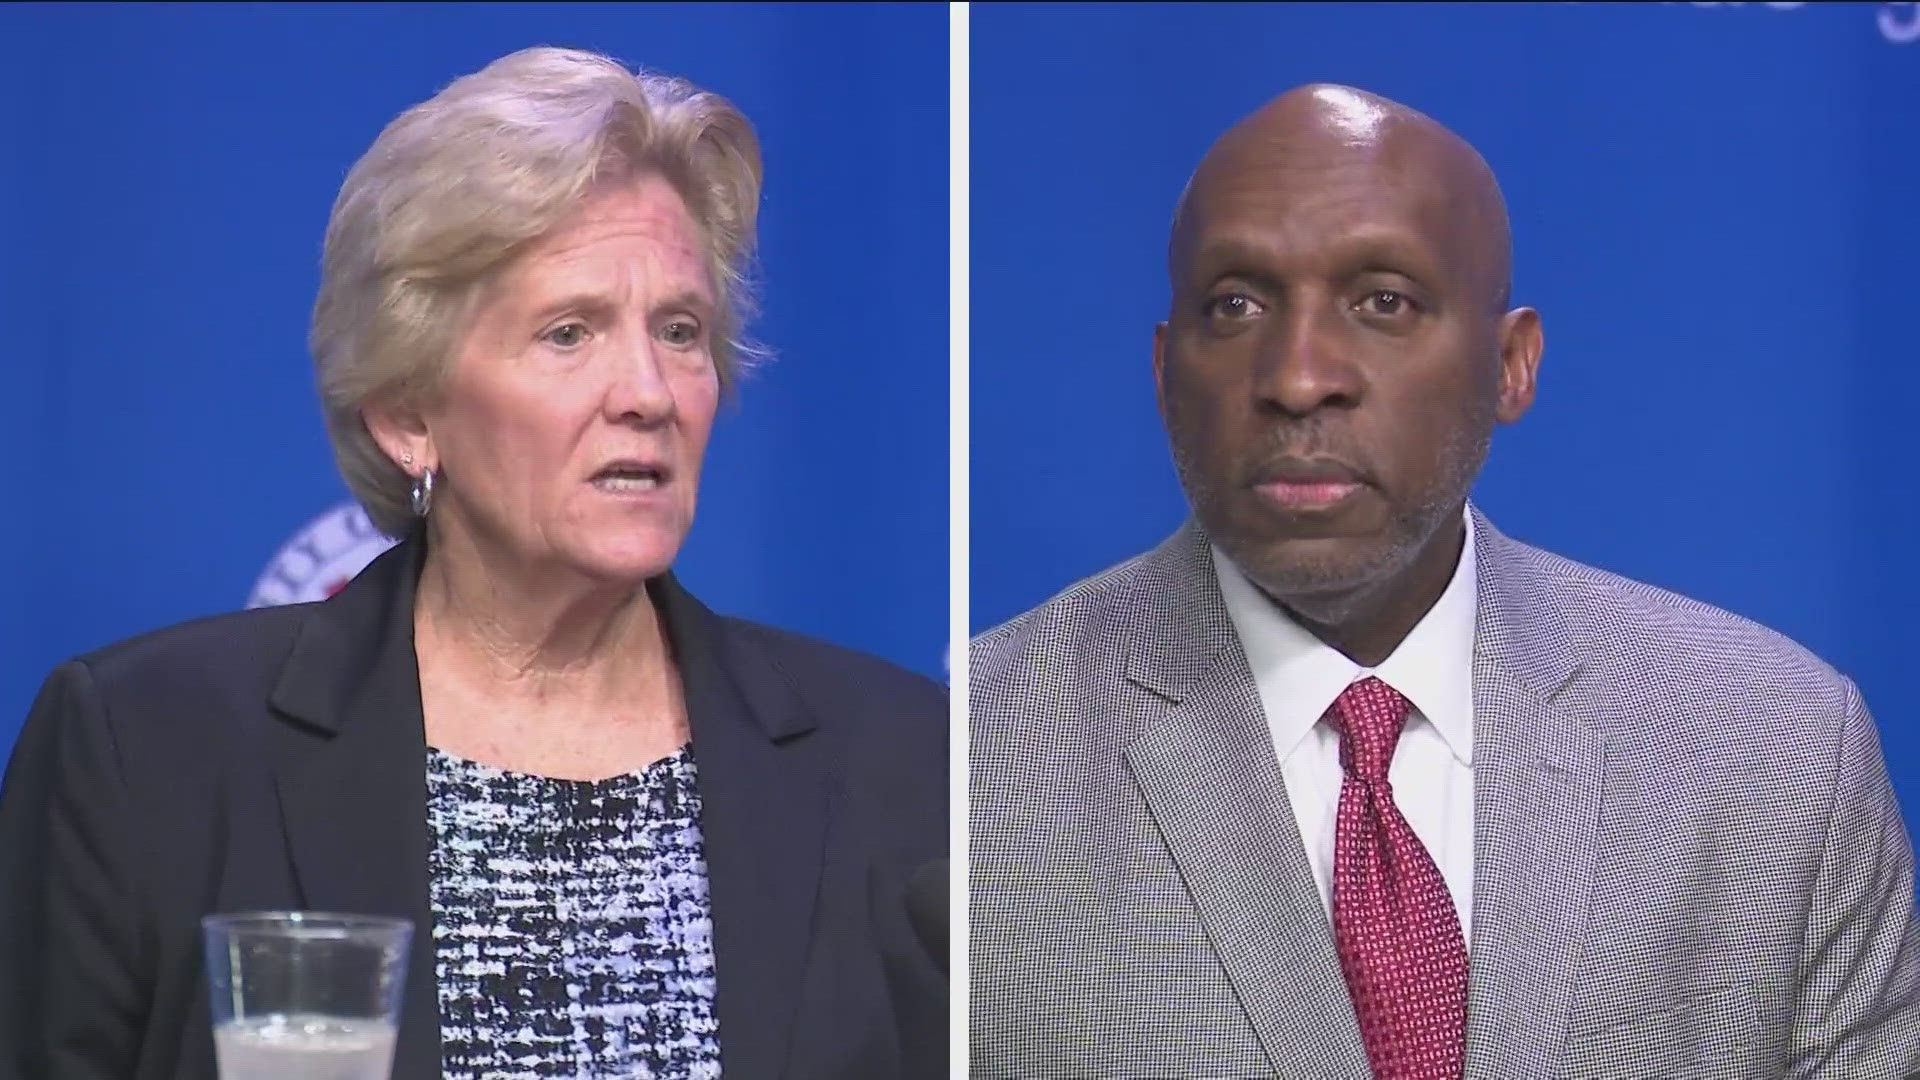 The candidates vying to be Austin's next city manager spoke with local media outlets on Tuesday.